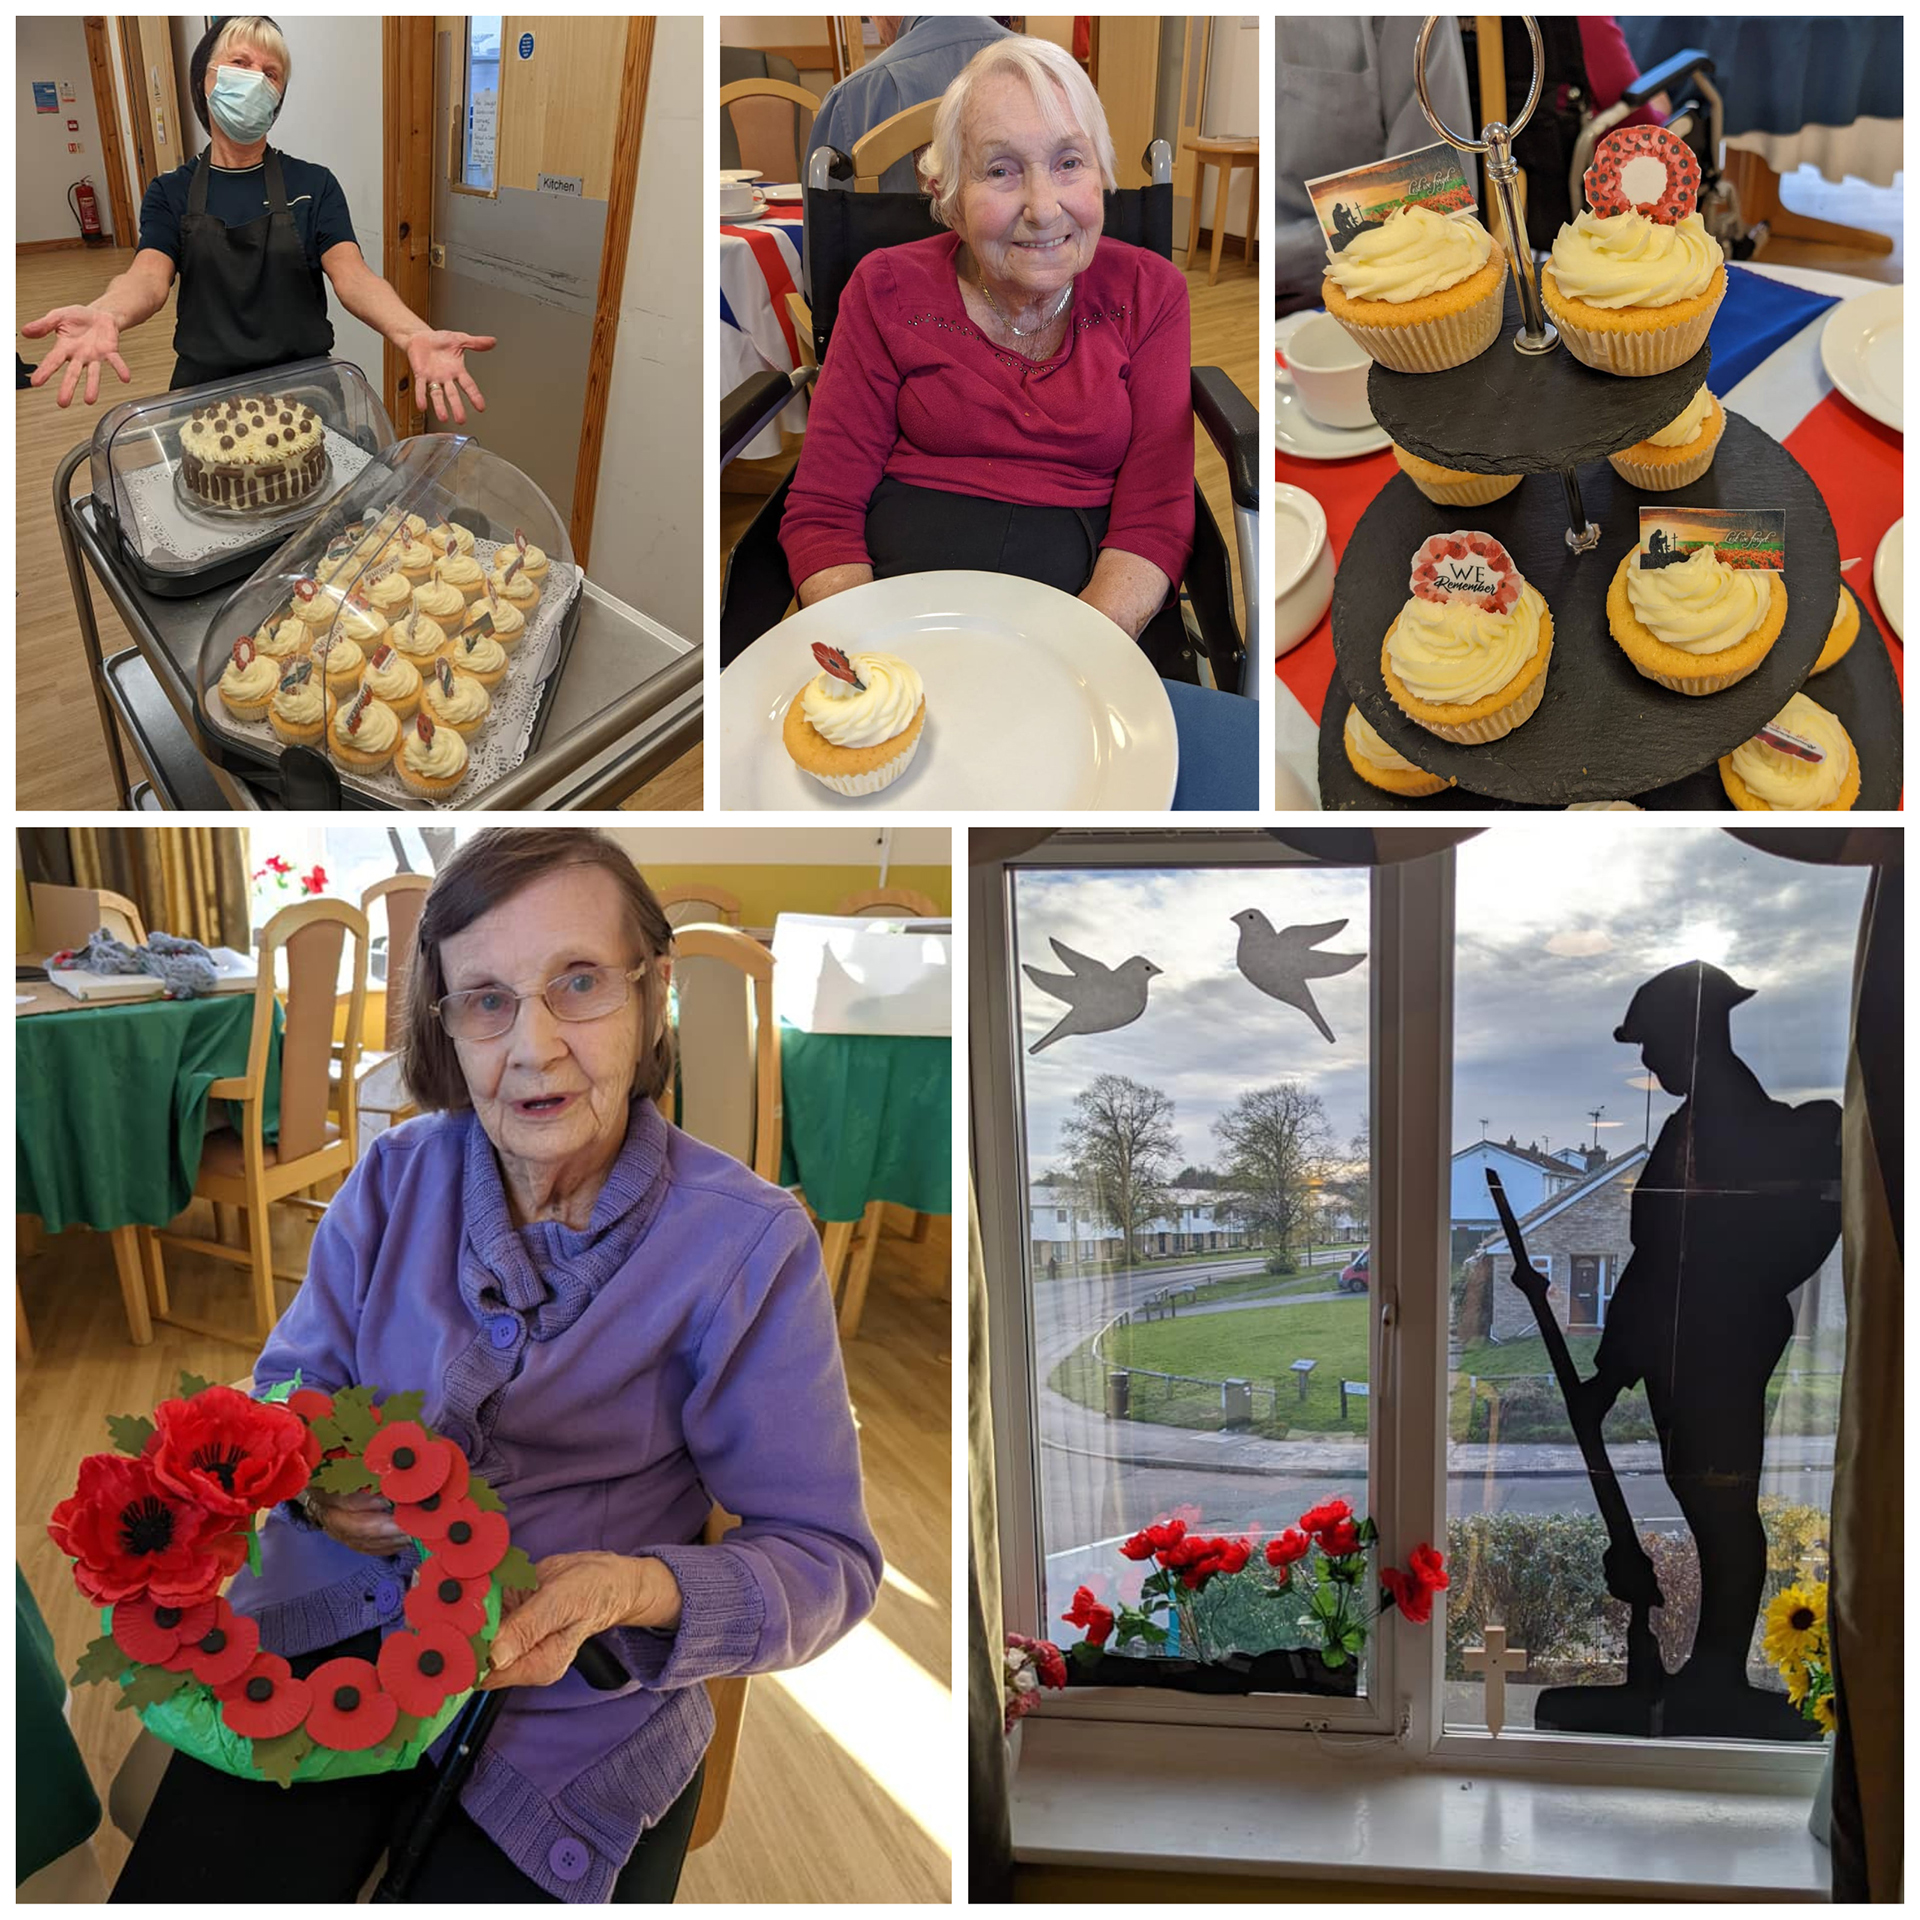 Residents at Aspen Grange Care Home in Braintree marking Armistice Day with creative crafts and a Remembrance-themed afternoon tea.